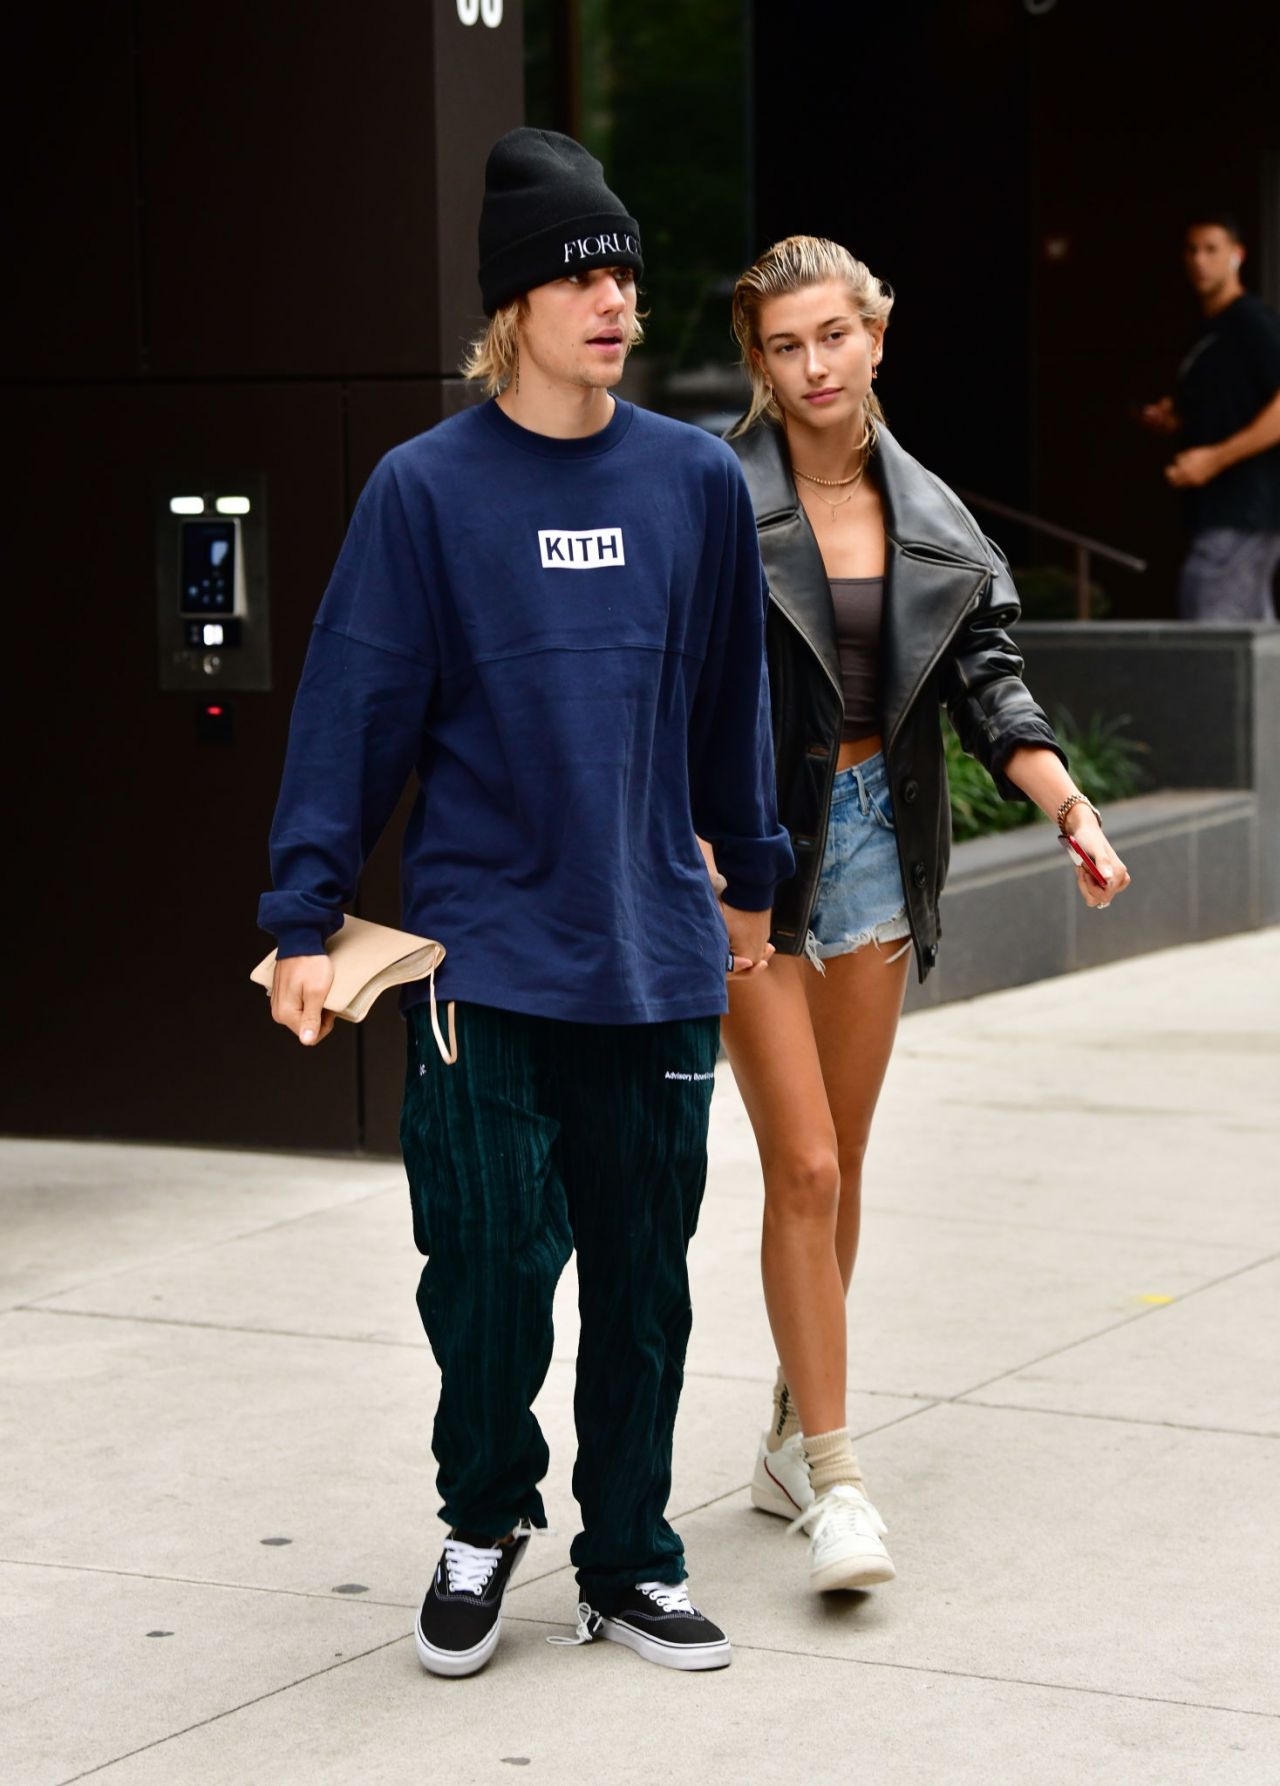 hailey-baldwin-and-justin-bieber-obtained-their-marriage-license-in-nyc-09-14-2018-4.jpg